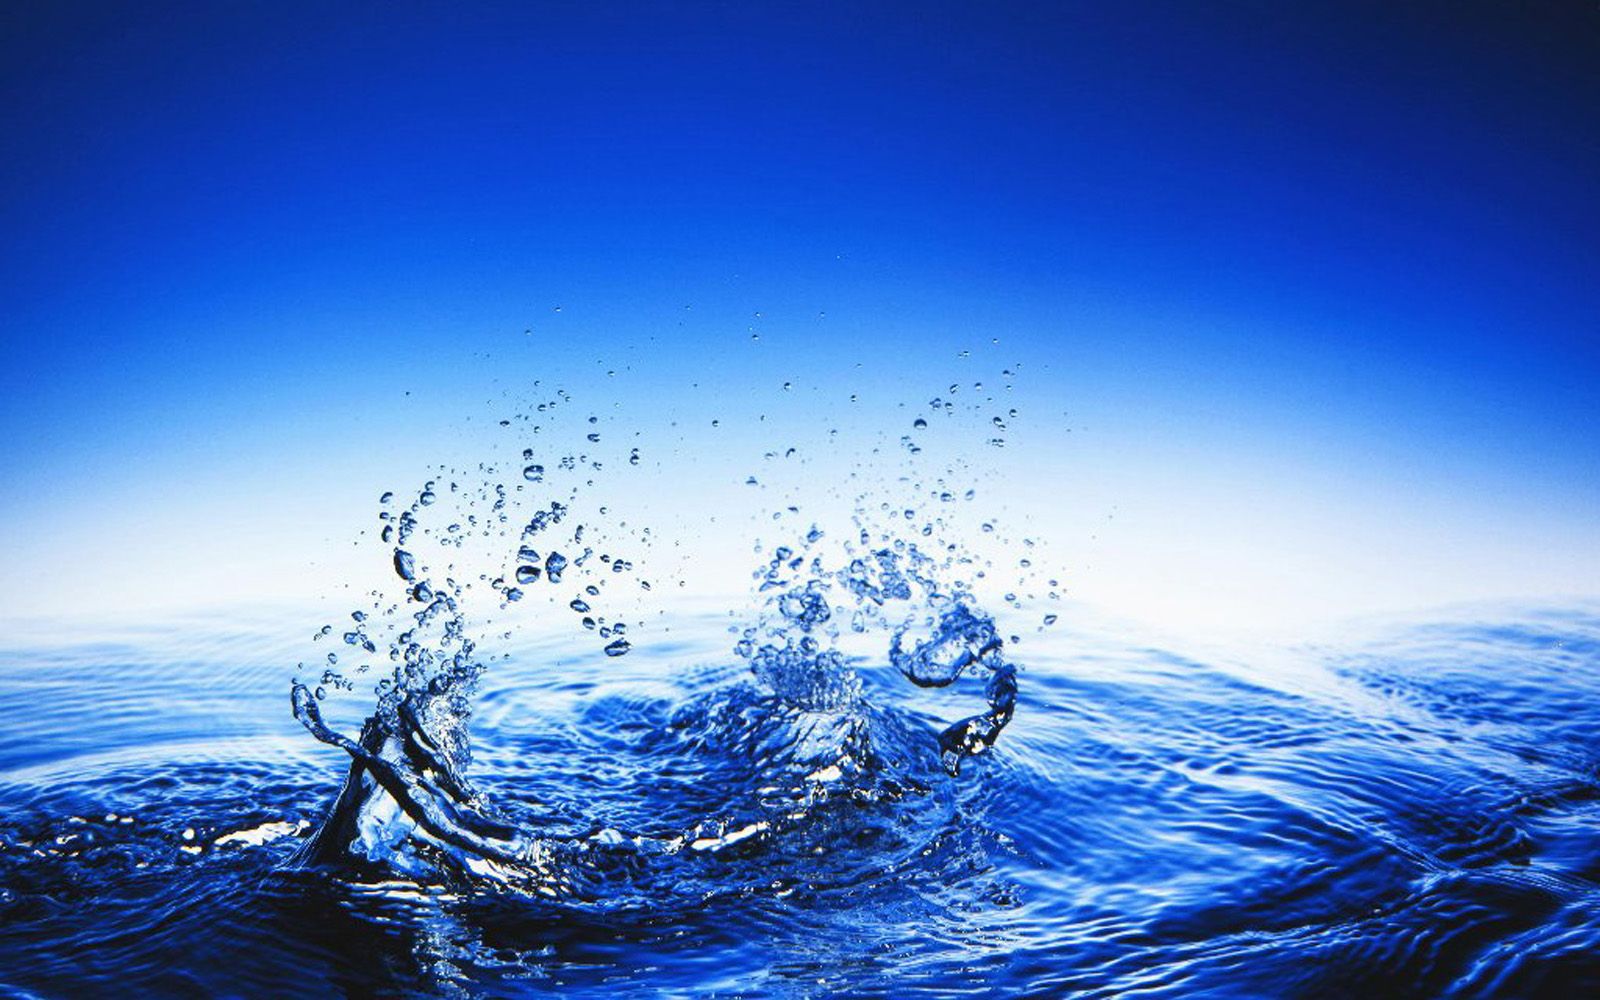 Water Wallpaper. Water Wallpaper, Underwater Wallpaper and Samsung Water Wallpaper